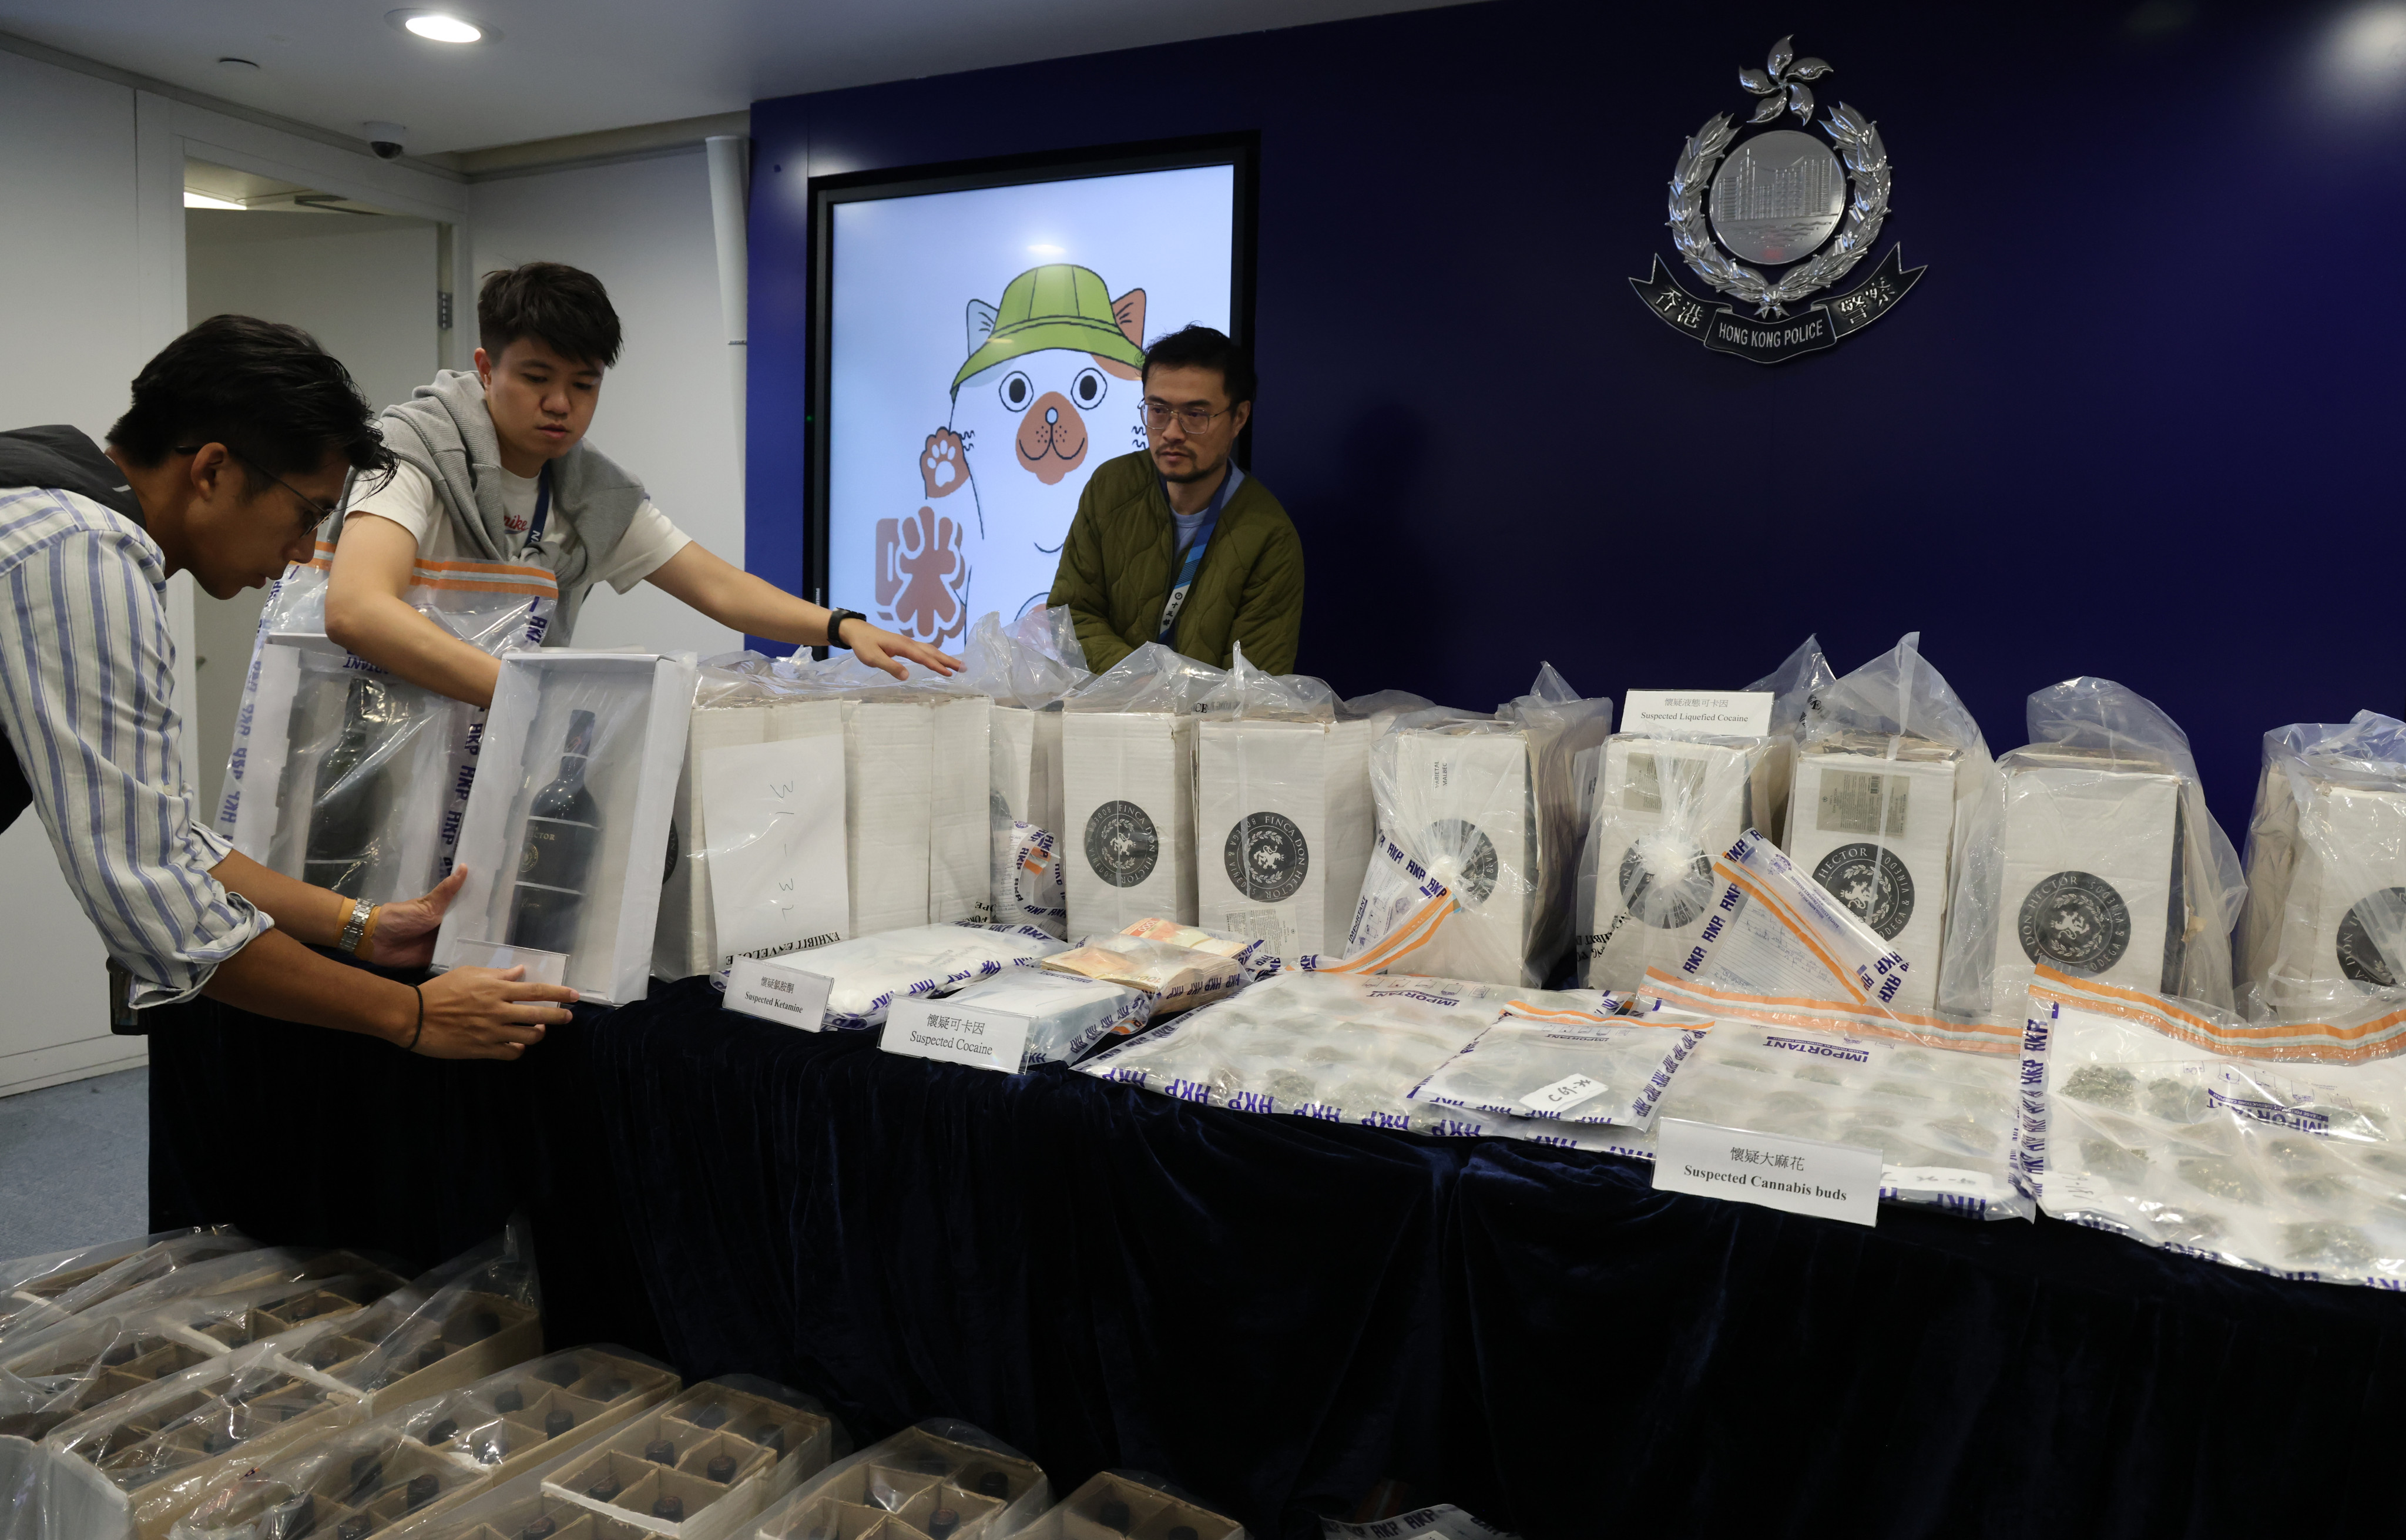 A Hong Kong police narcotics bureau press conference displays illegal drugs seized during an investigation, including 214 kilograms of suspected liquid cocaine, one kilogram of suspected cocaine, a small amount of cracked cocaine and other illegal drugs valued at about $215 million. Photo: Jelly Tse